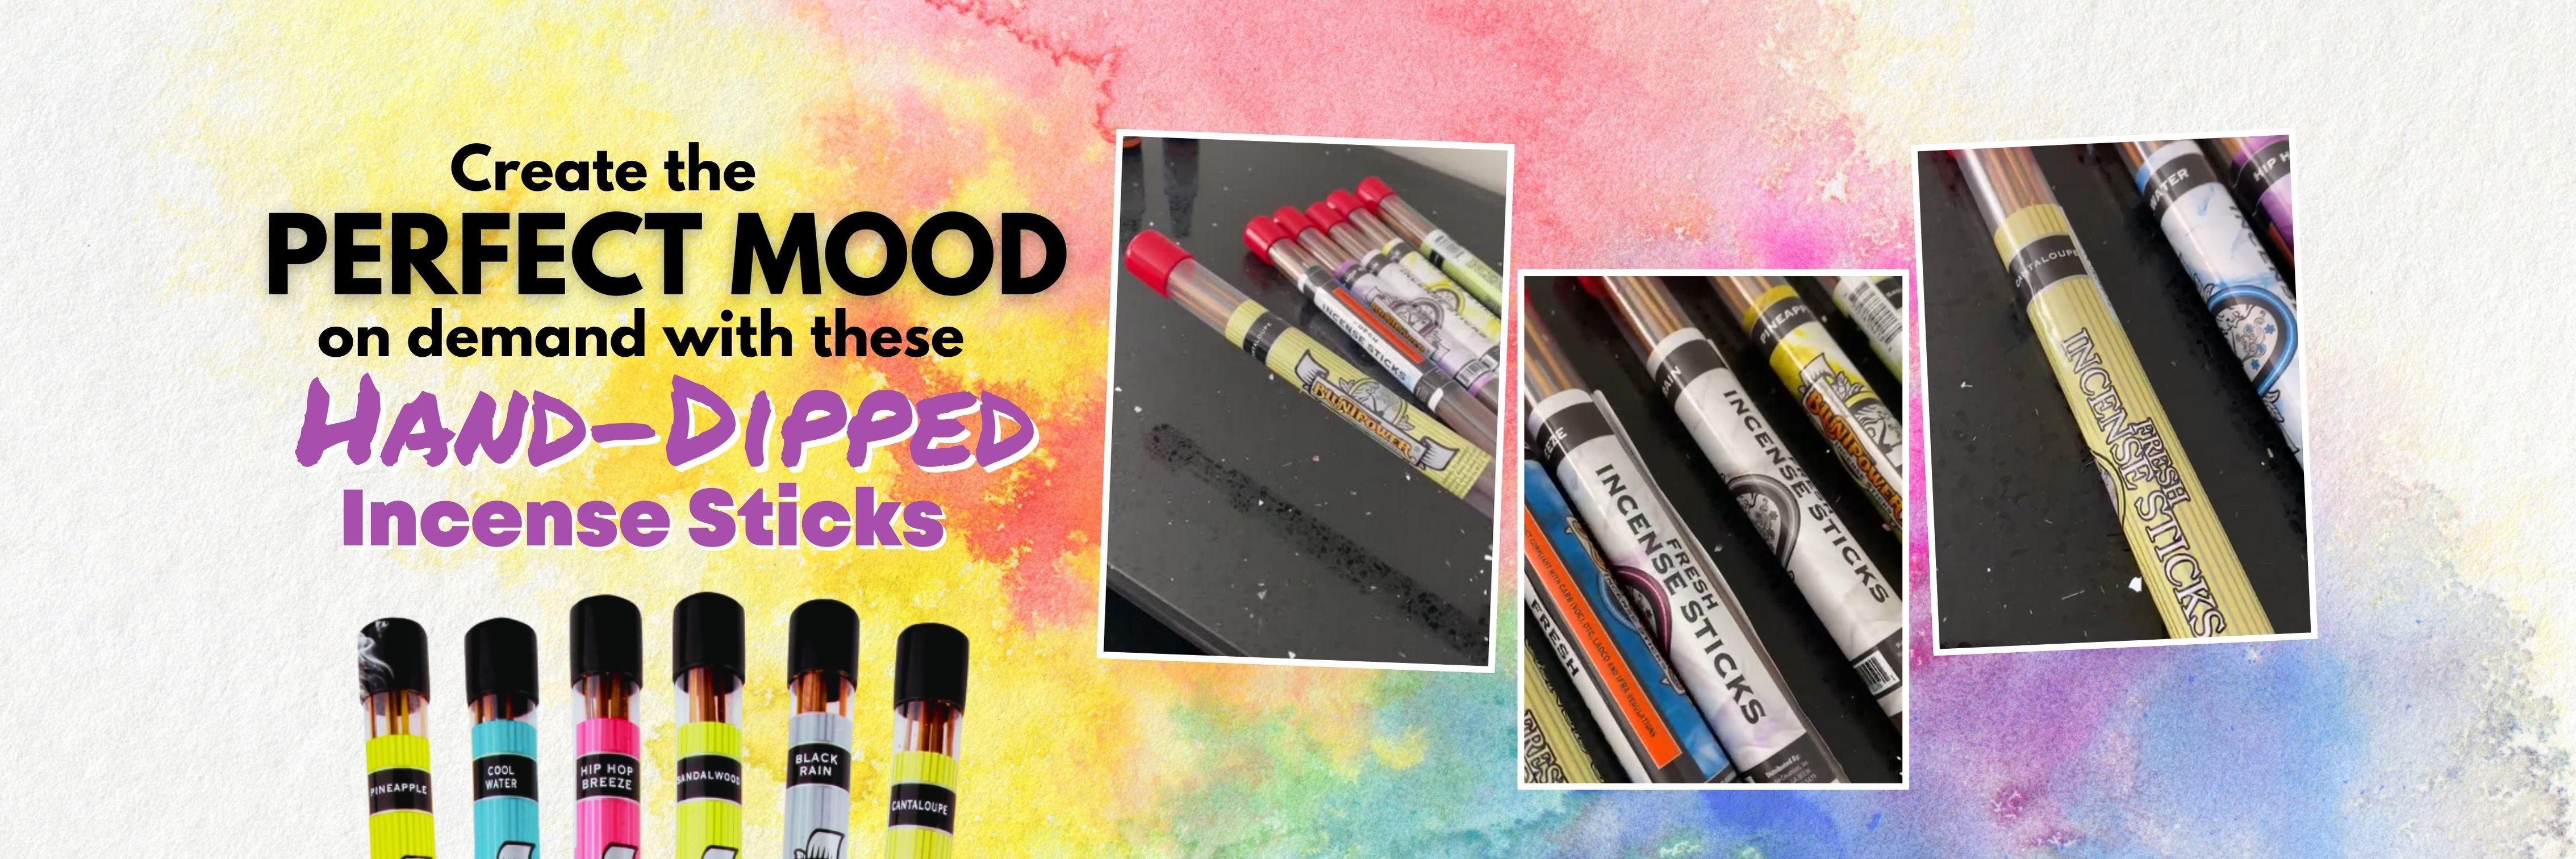 5 Awesome Art Materials That Will Blow Your Mind - The Art of Education  University